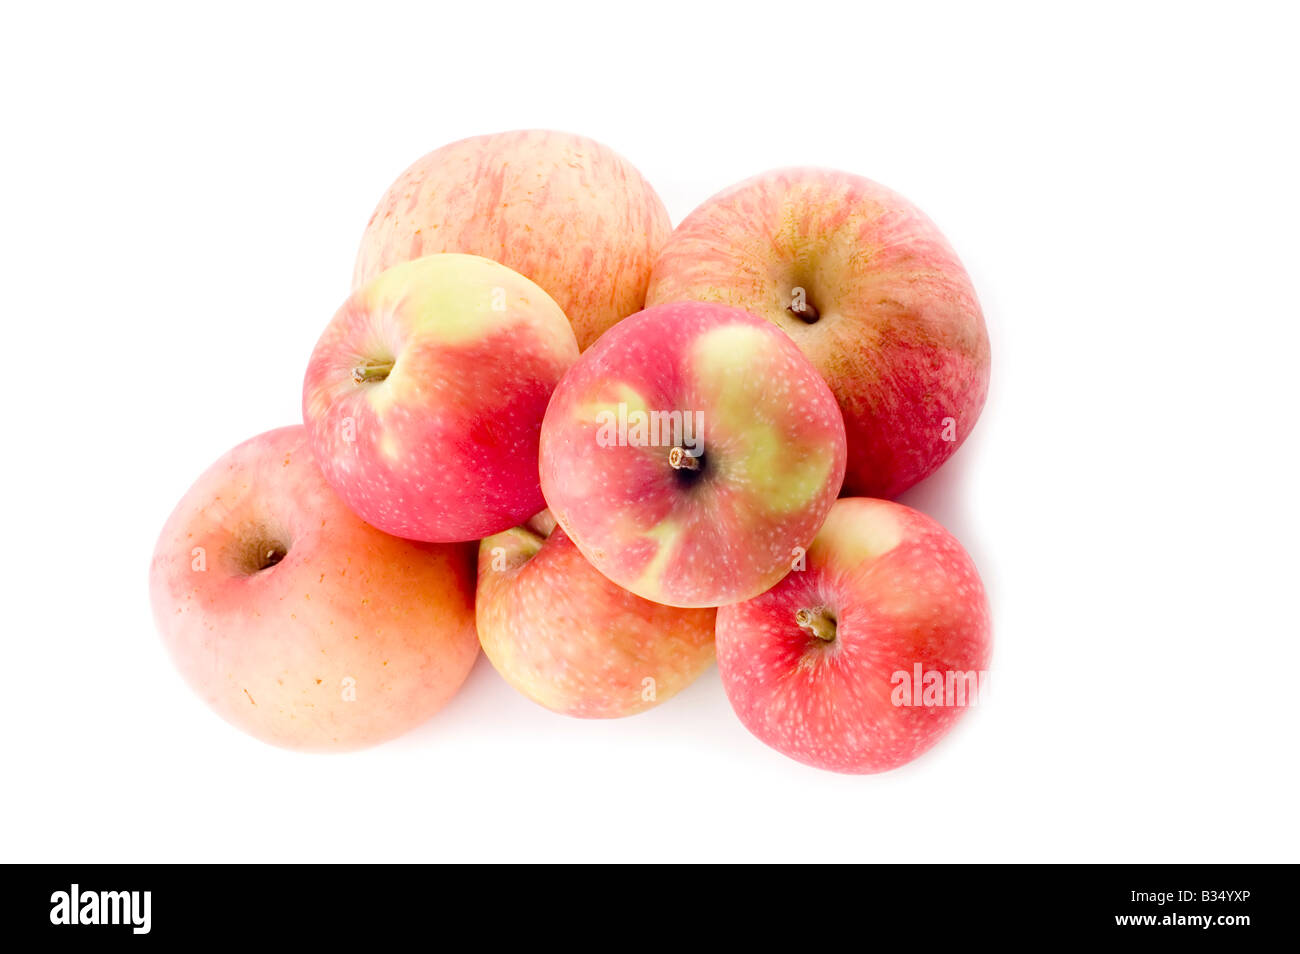 object on white raw food apple Stock Photo